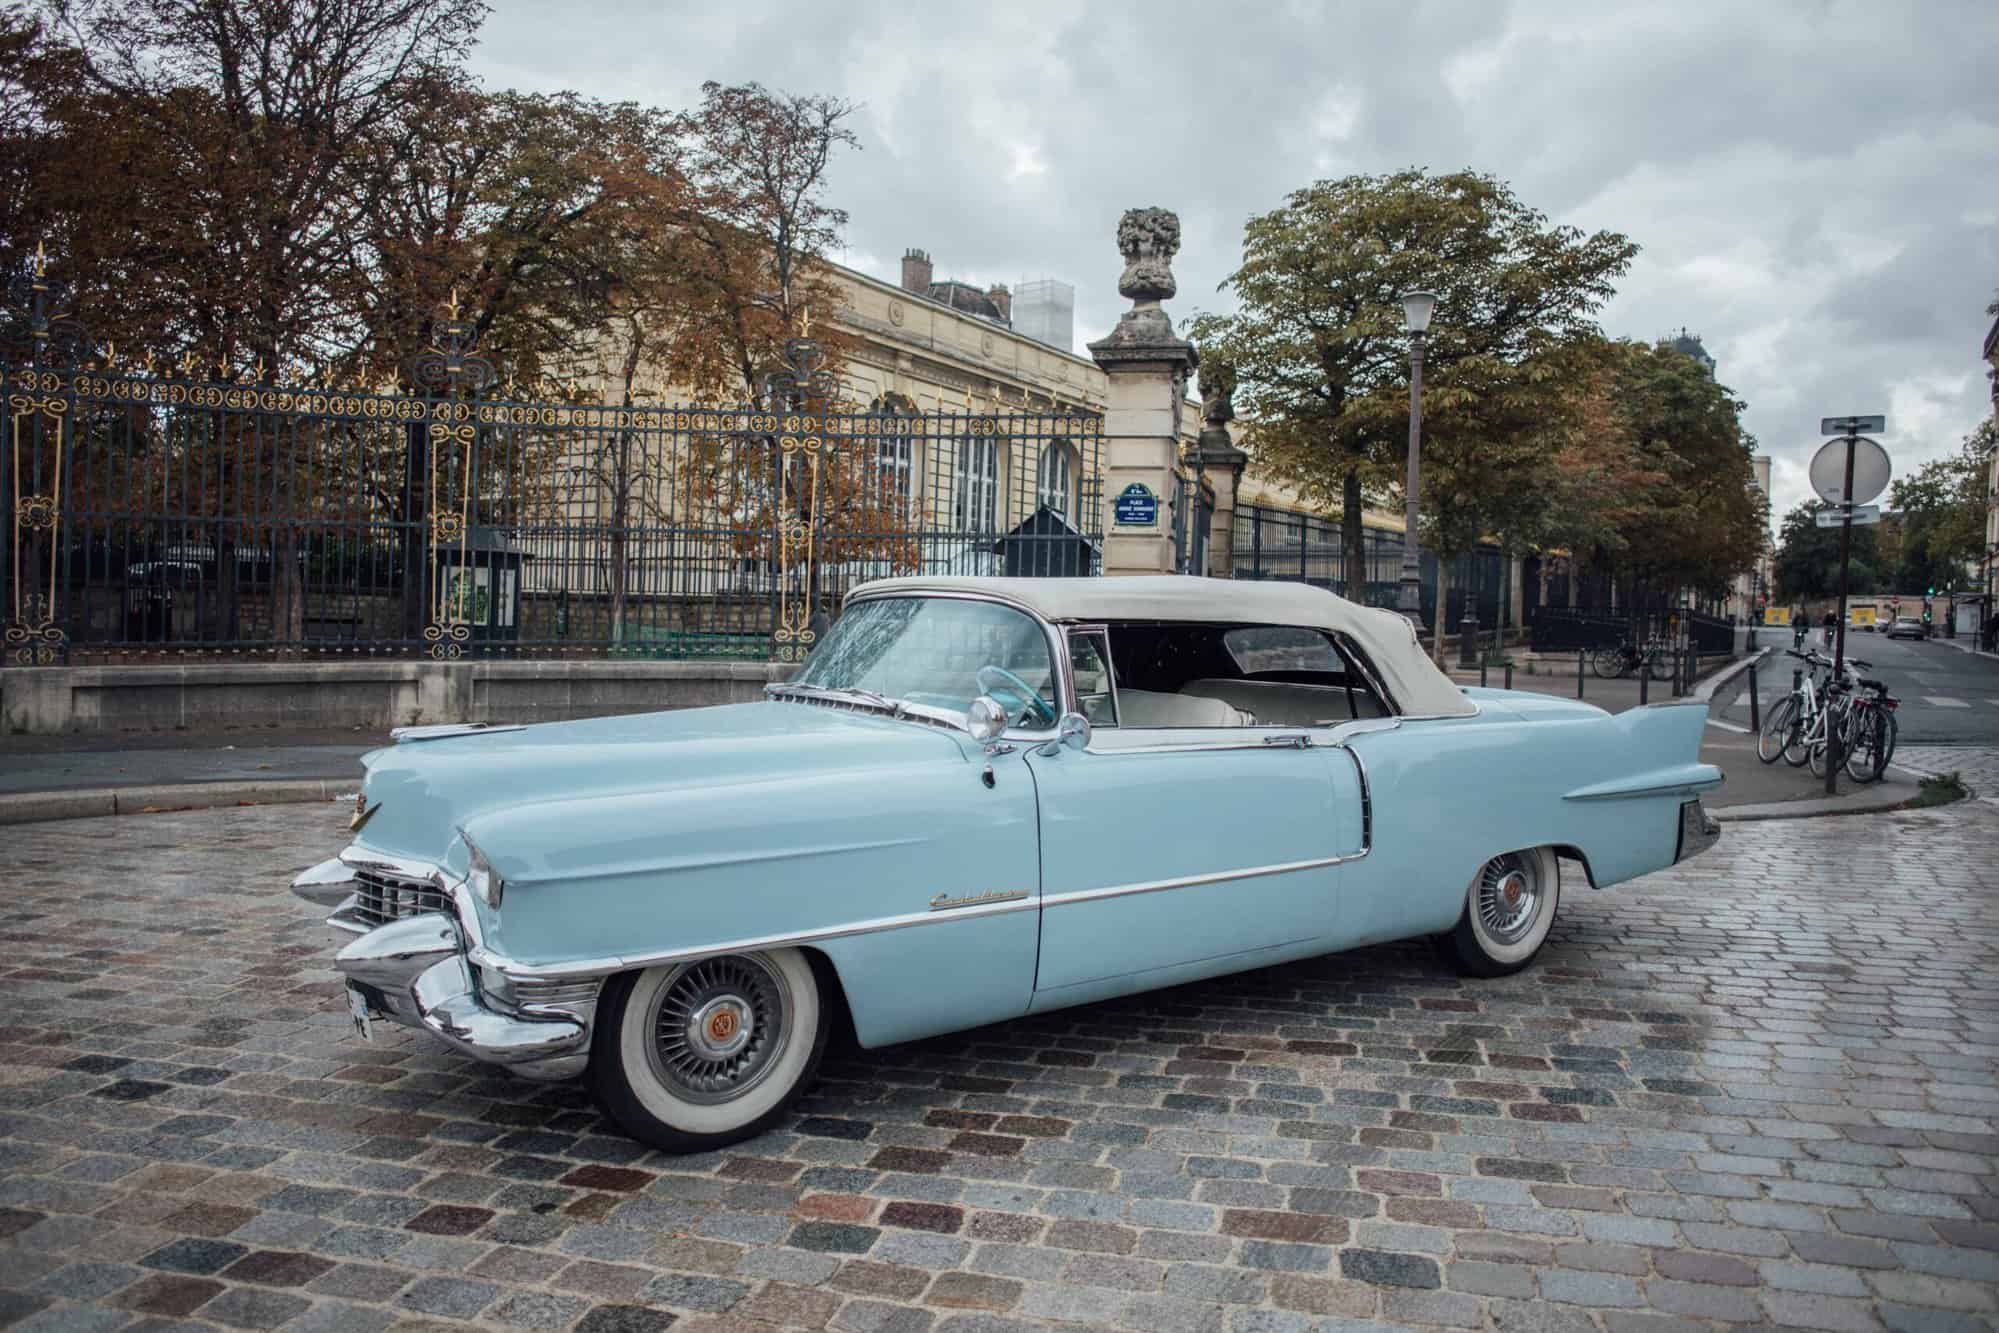 A old blue car is parked on a cobble driveway on a rainy fall day in Paris